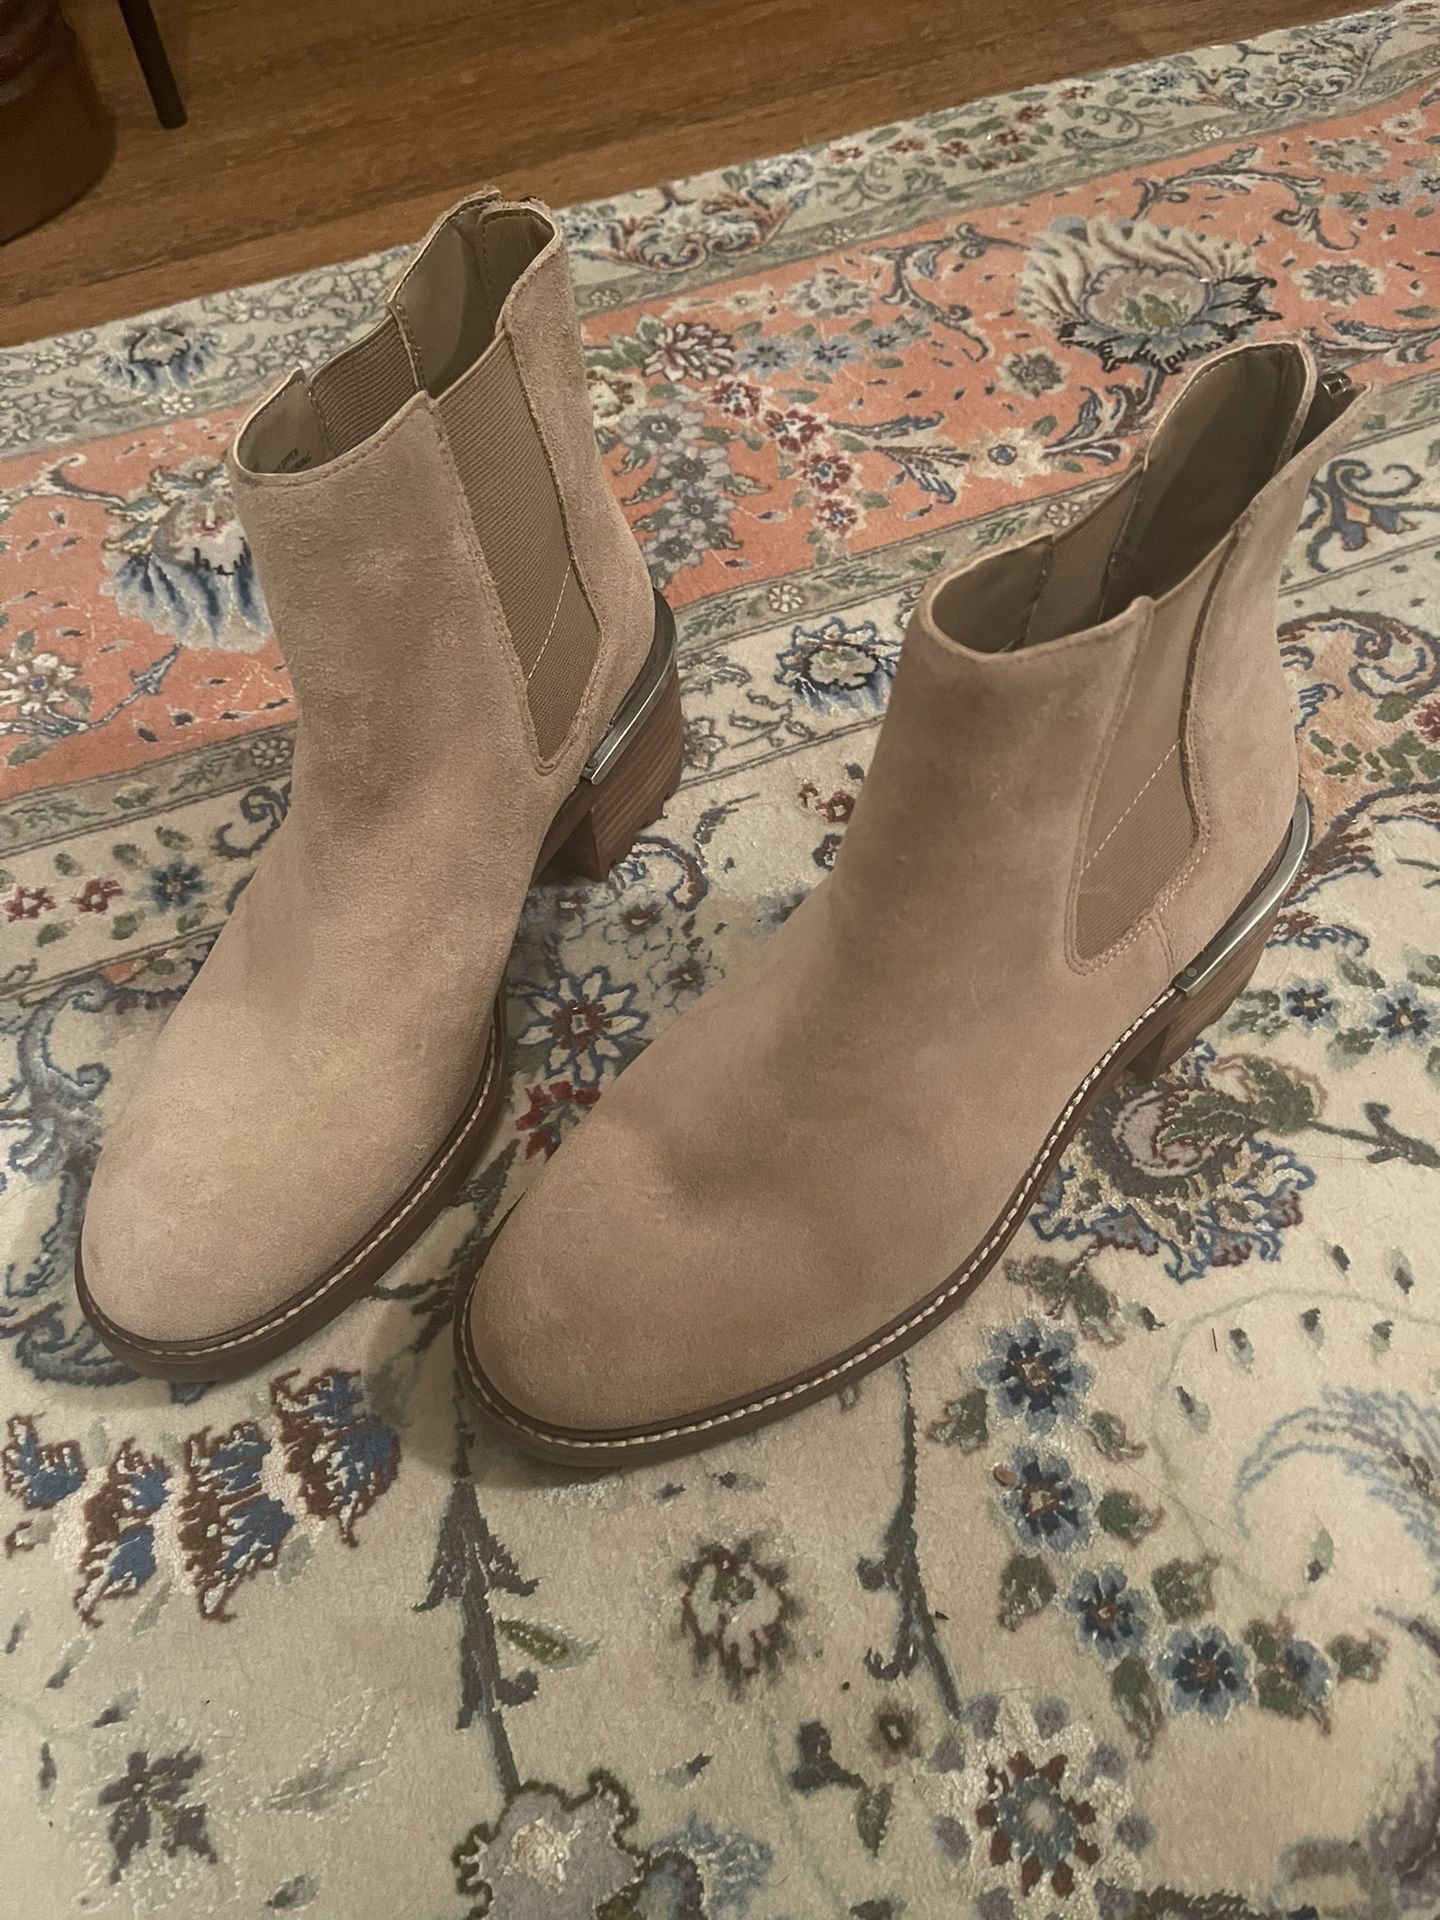 Vince Camuto Ankle Boots 9.5 New 